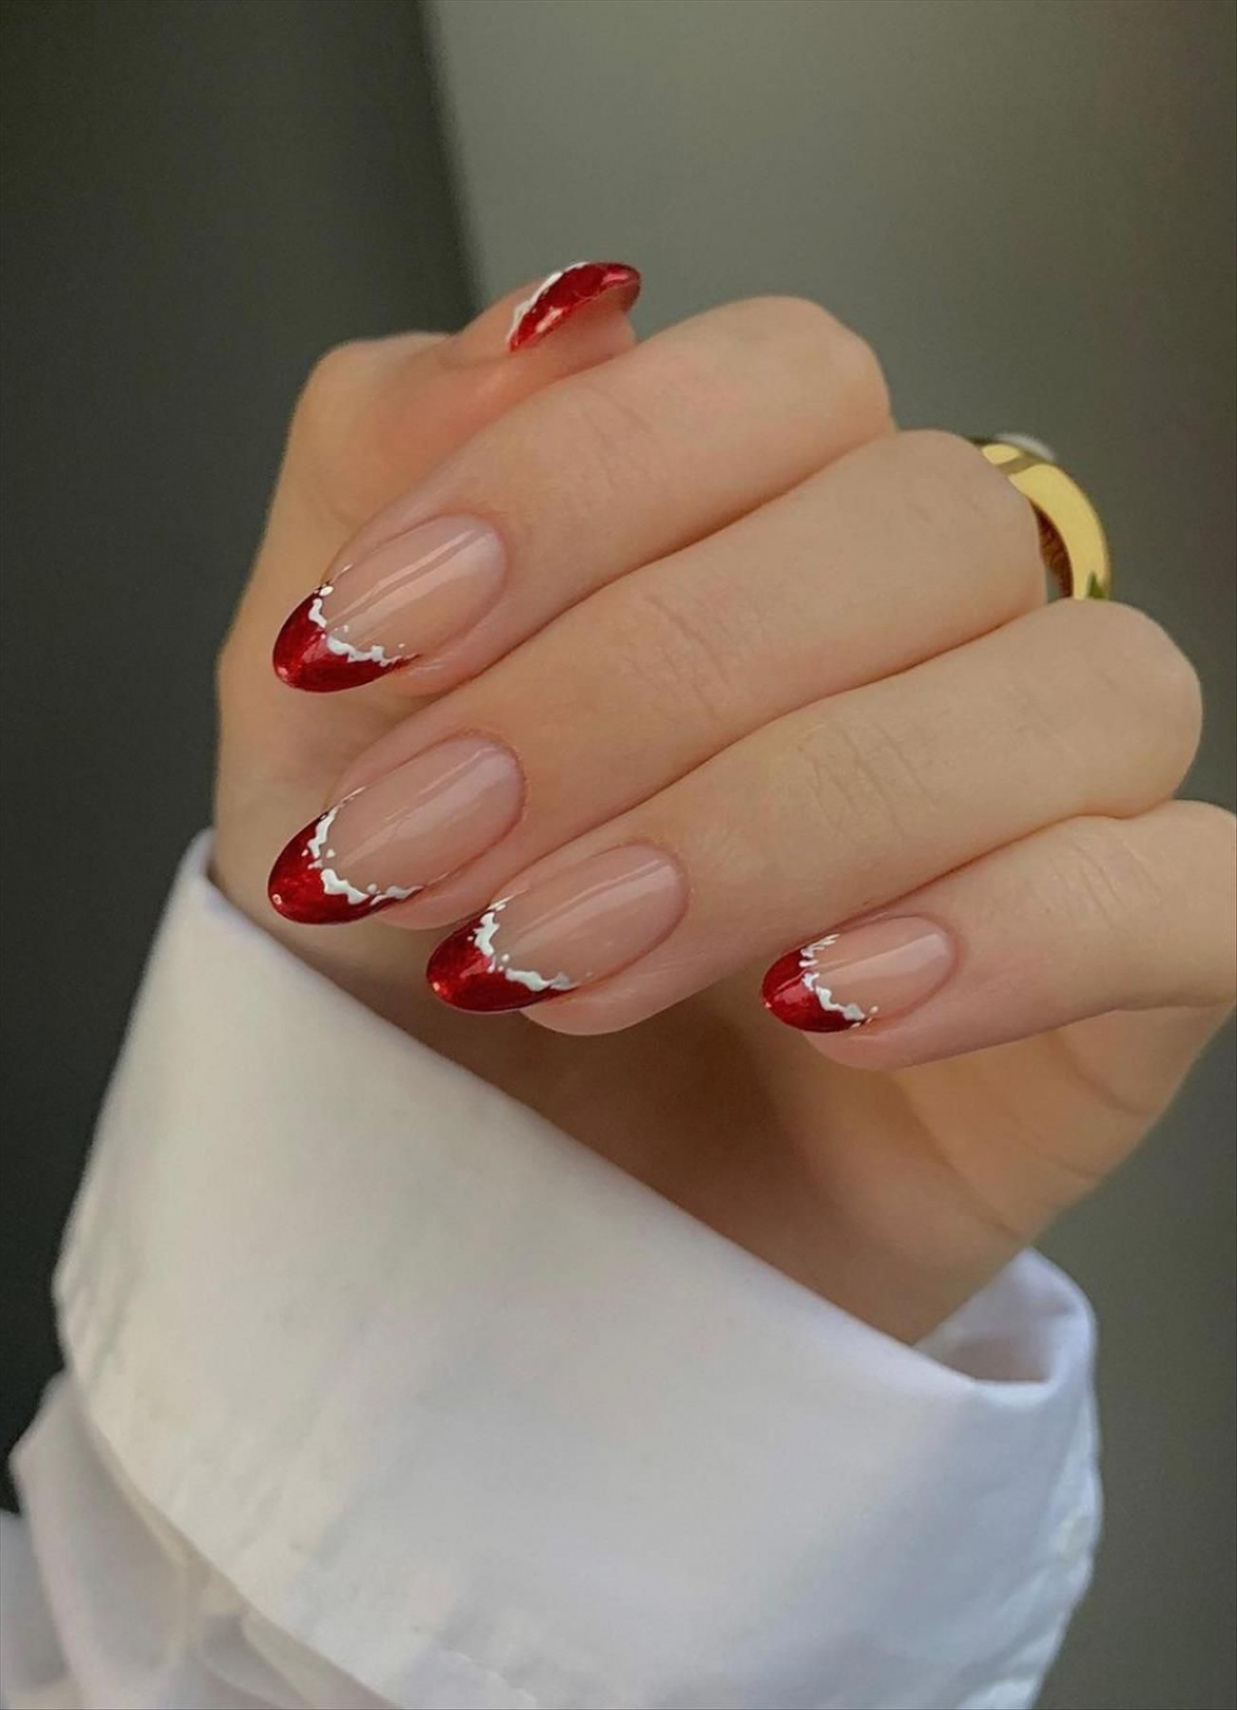 Best Short Christmas nails design  with almond nail shapes